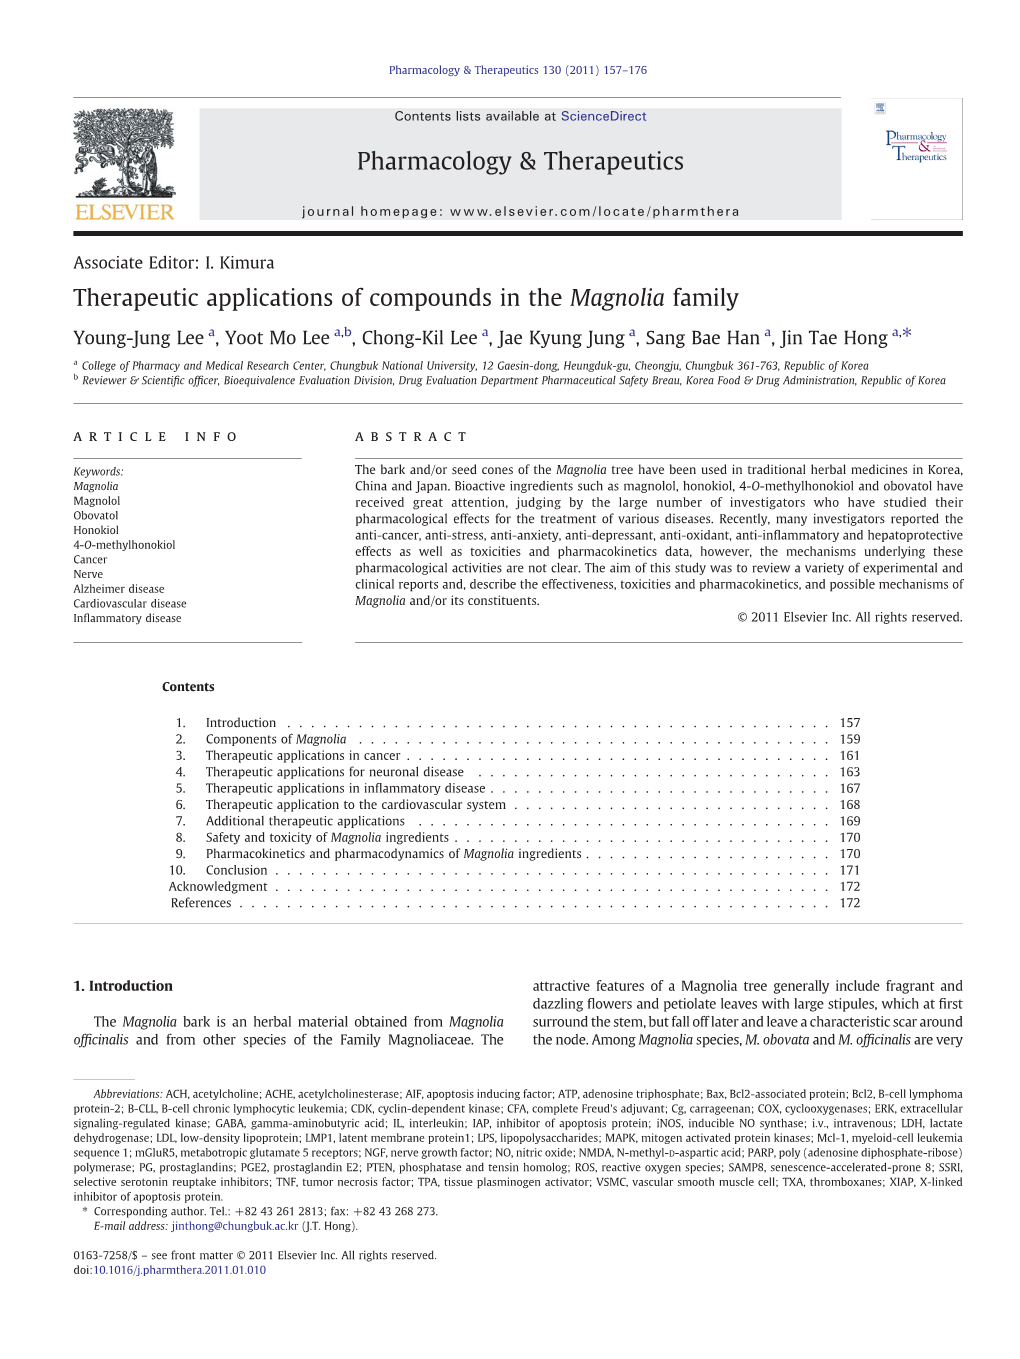 Therapeutic Applications of Compounds in the Magnolia Family